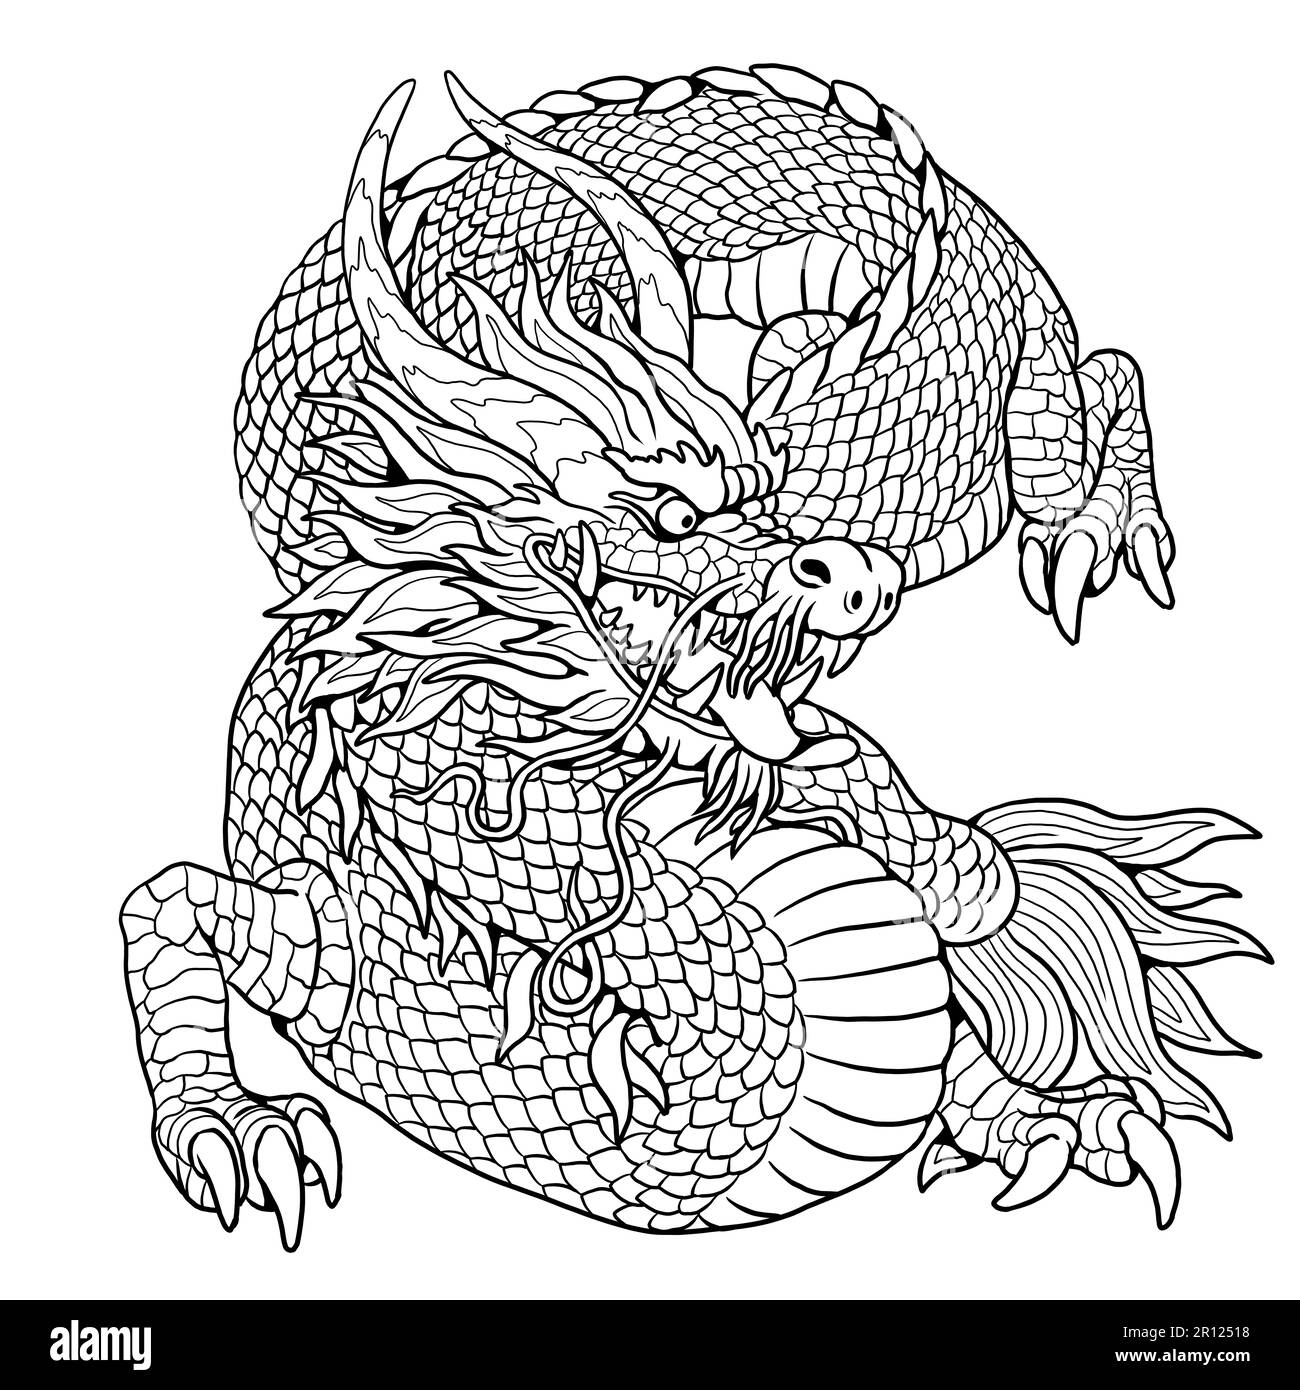 Chinese Dragon Long coloring page. Fantasy illustration with mythical creature. Asian dragon drawing coloring sheet. Stock Photo